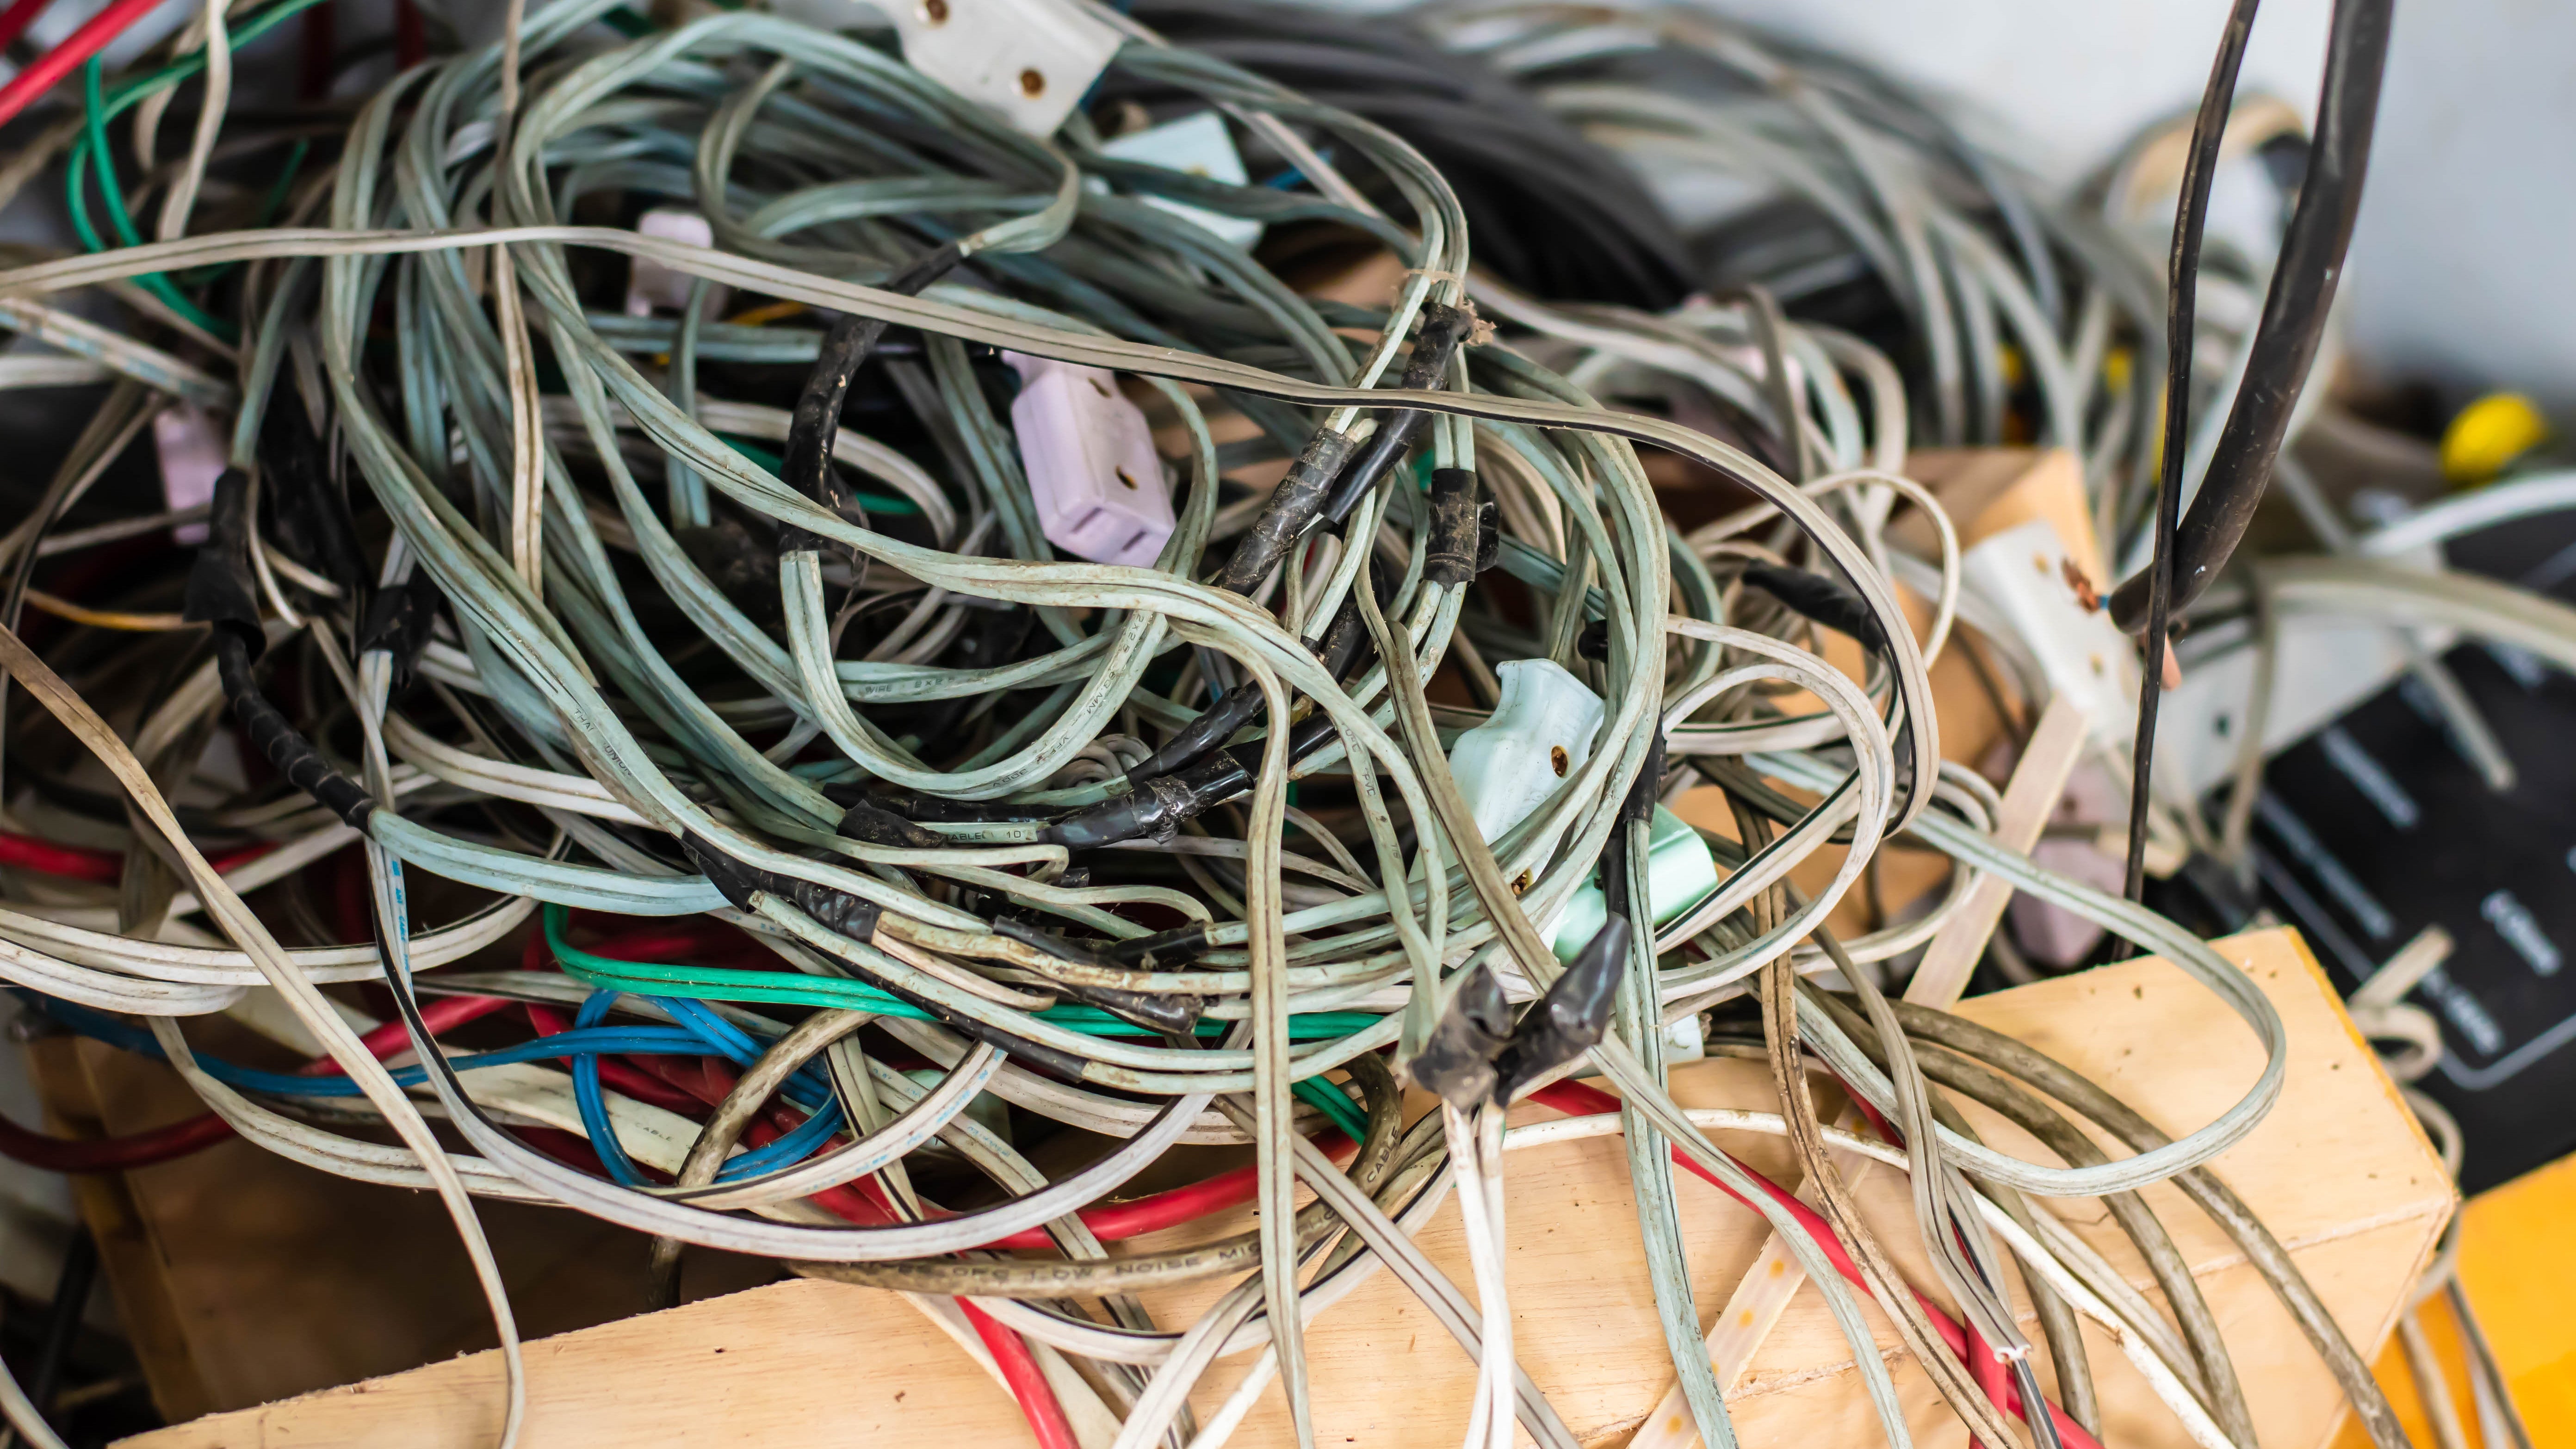 What To Do With All Those Cables And Cords You’ve Hoarded